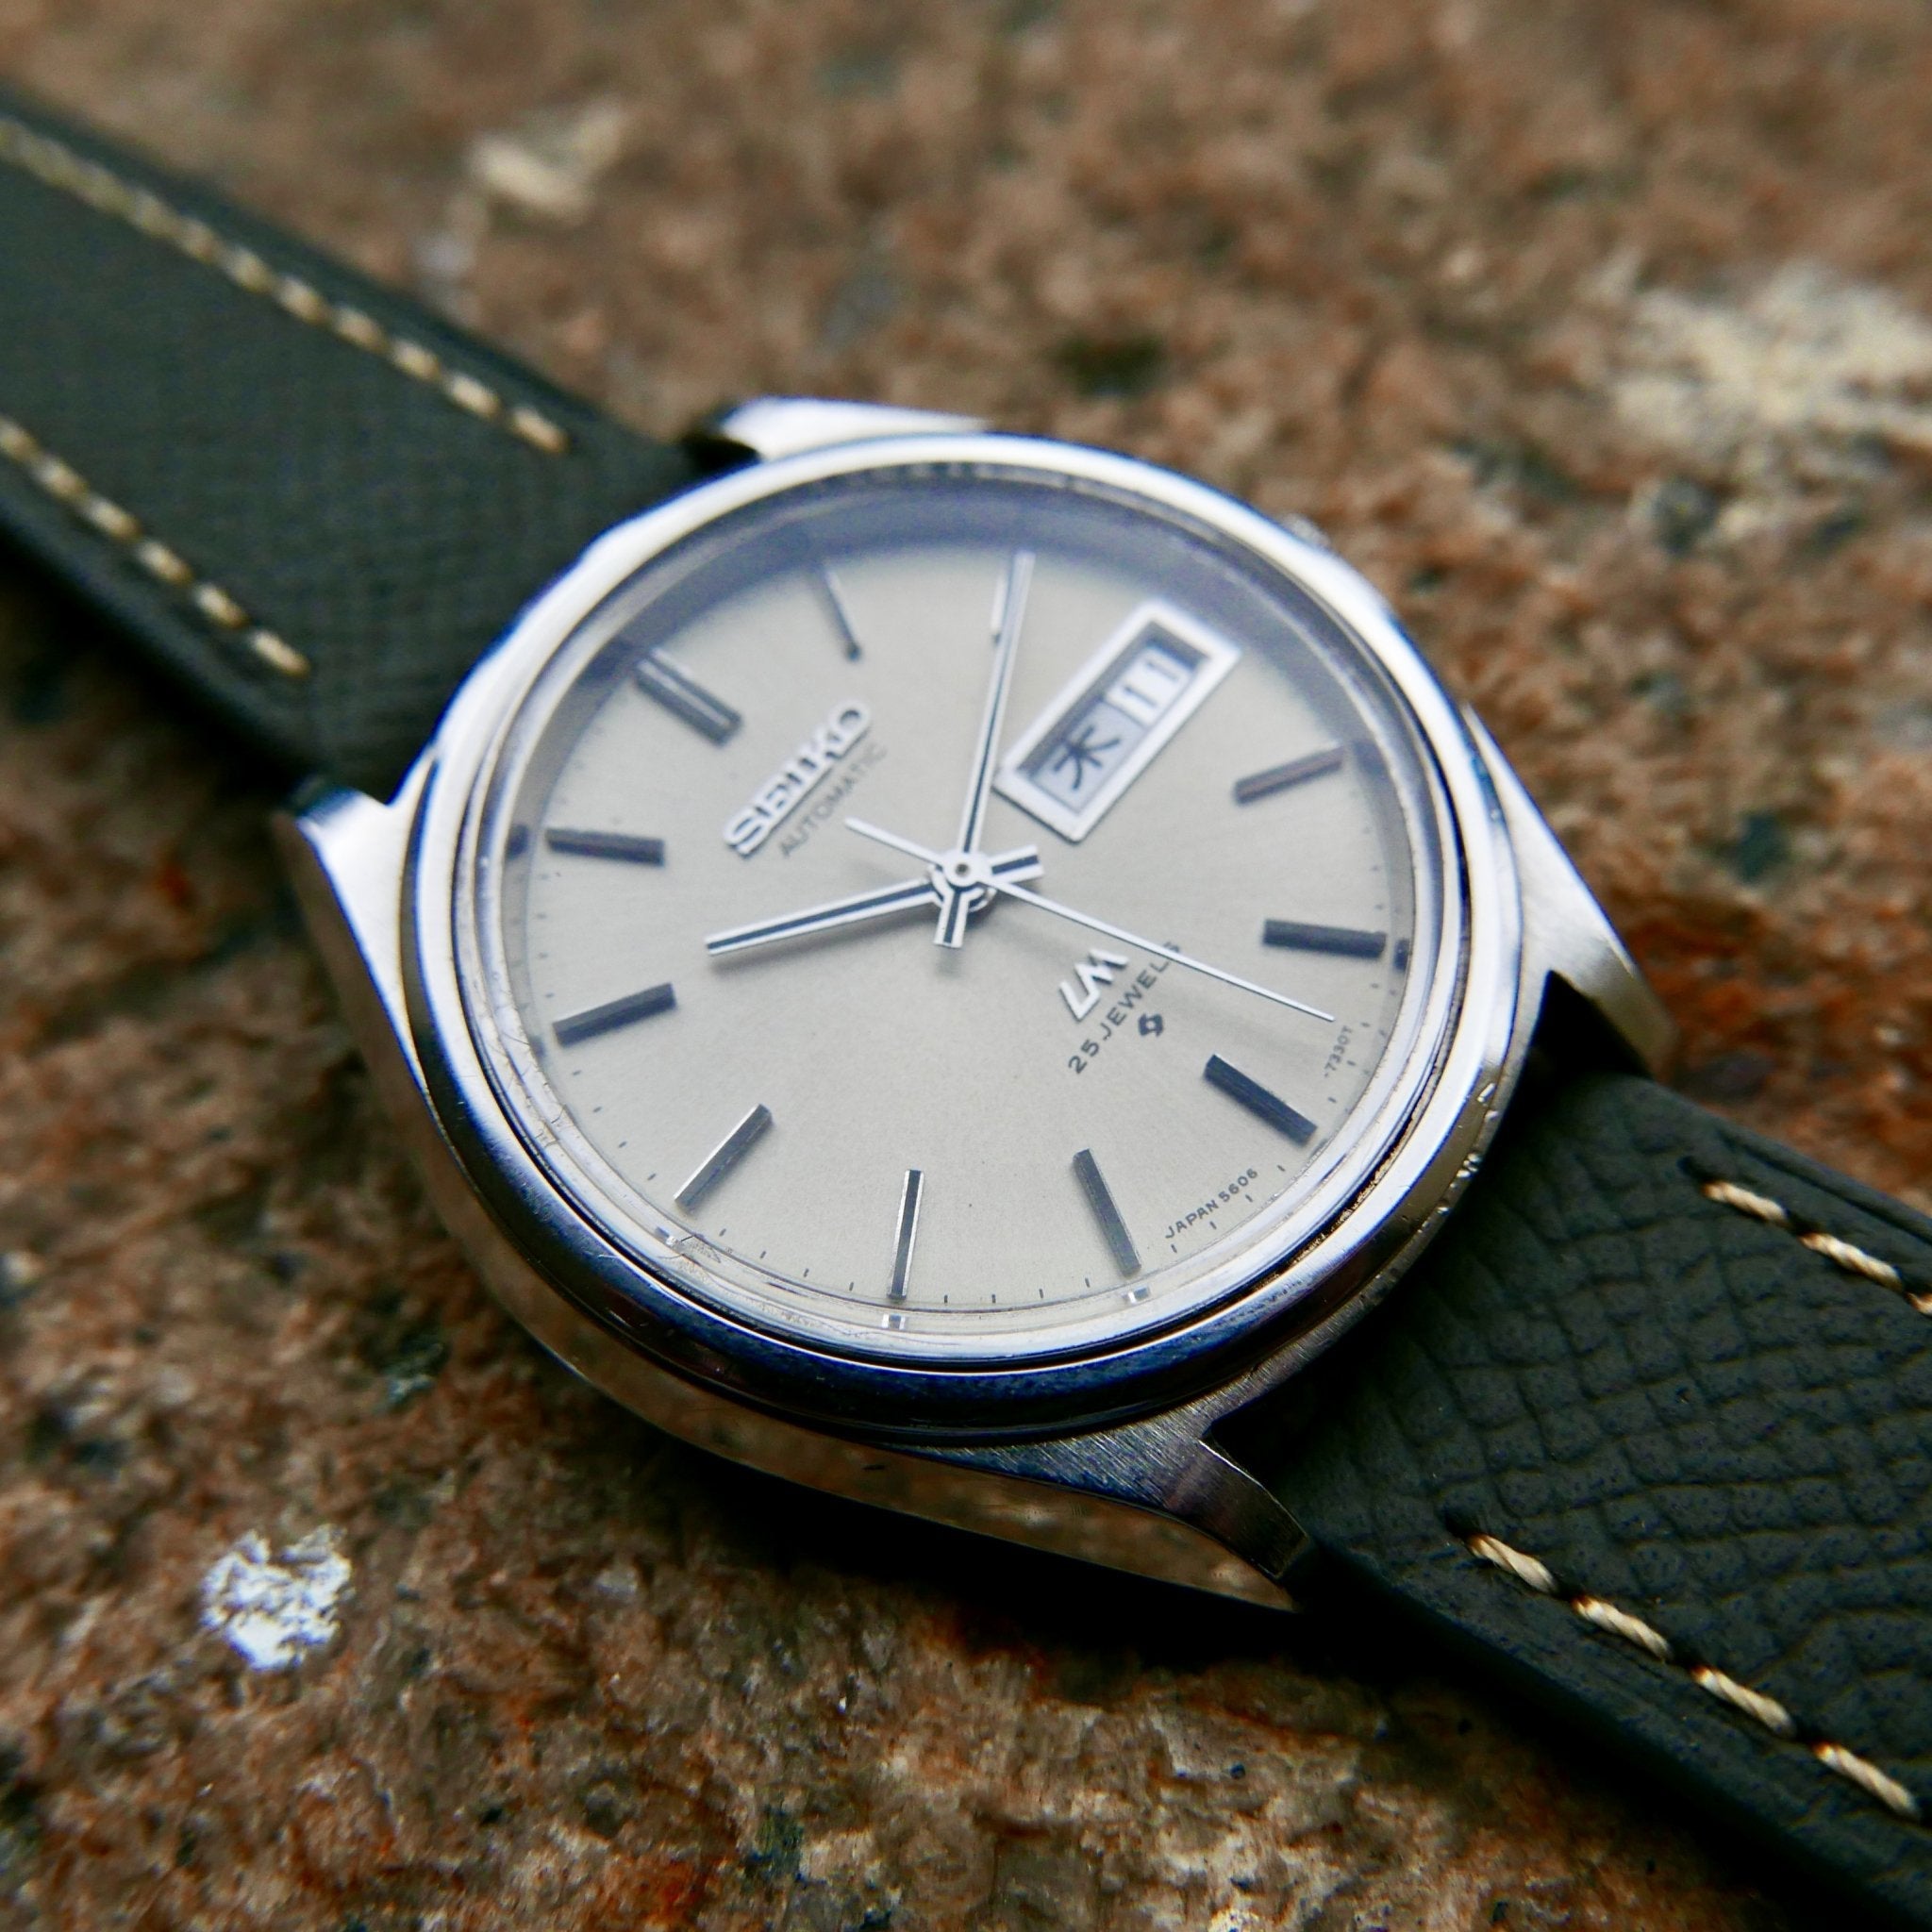 Vintage Watch | Seiko Lord Matic 5606 [Mint Condition] - Samurai Vintage Co.